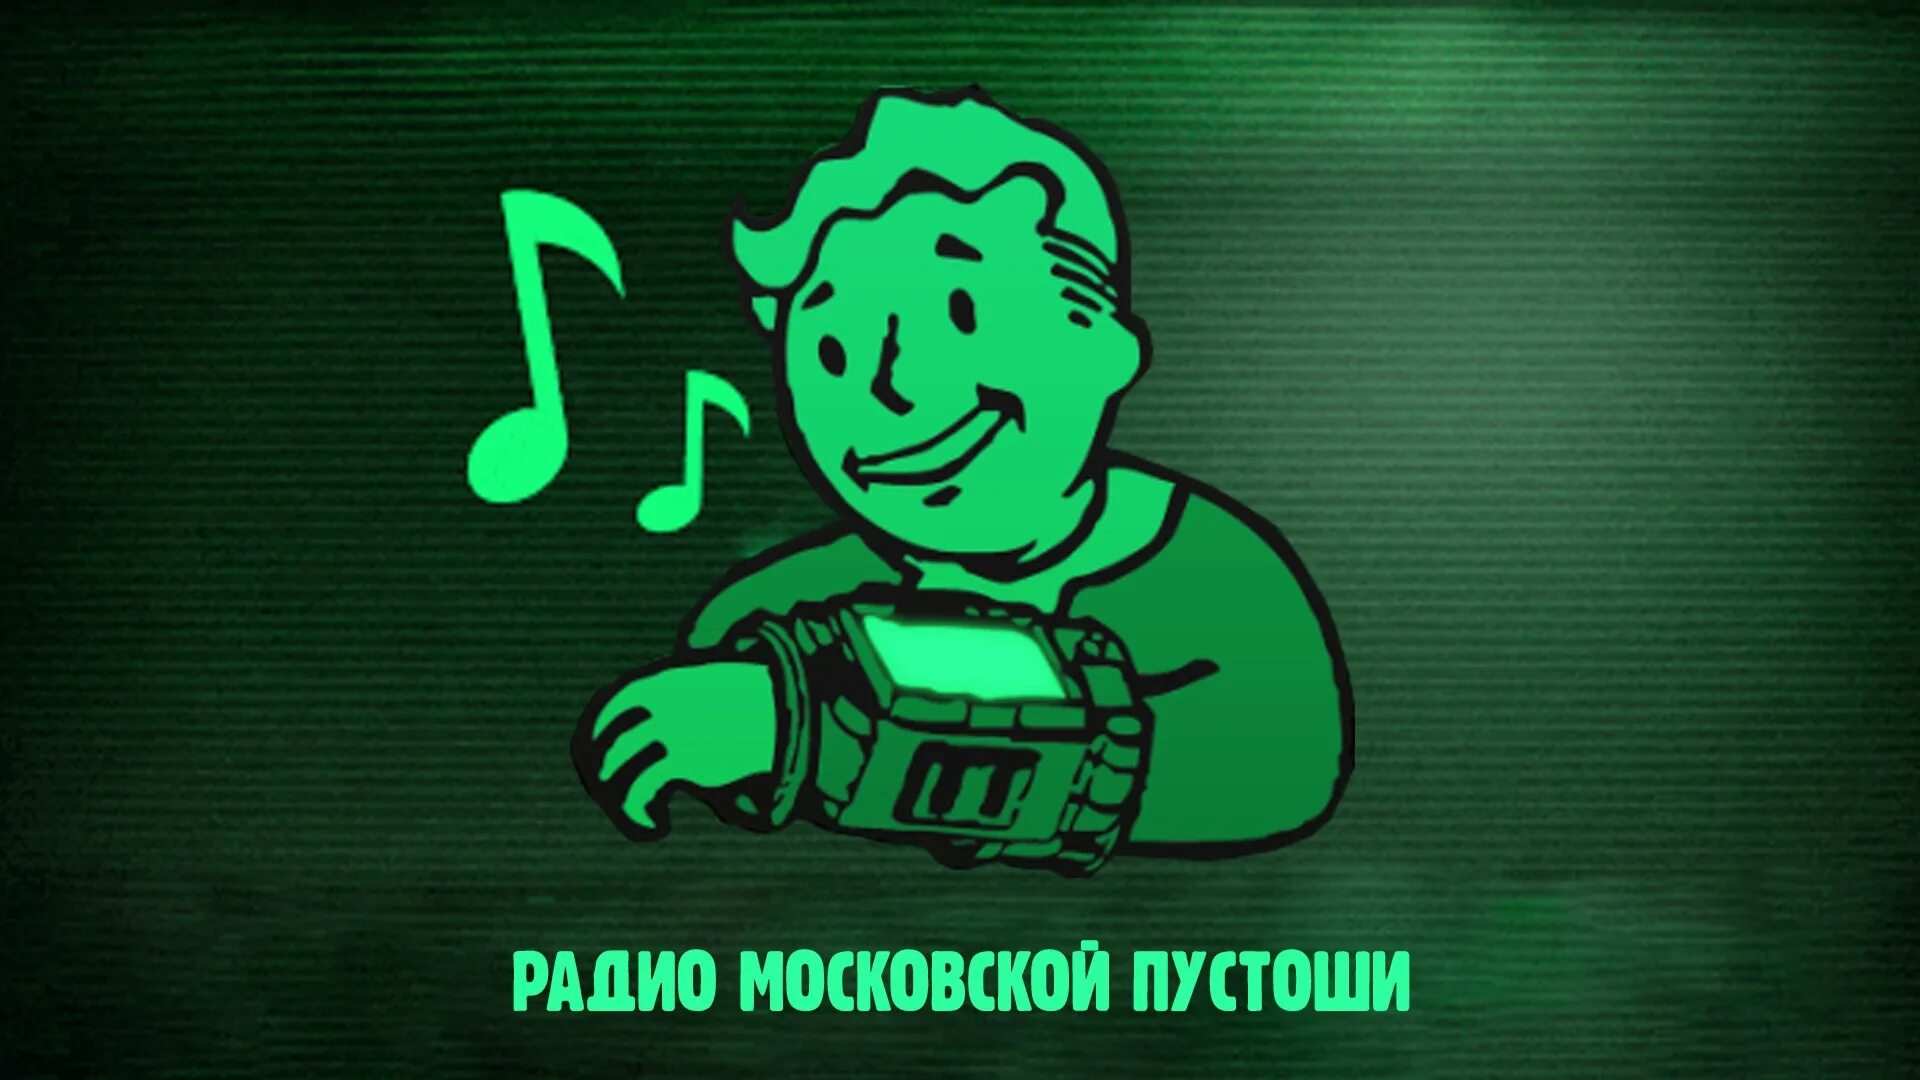 Fallout радио. Fallout 3 радио. Радио фоллаут 4. Фоллаут гиф.